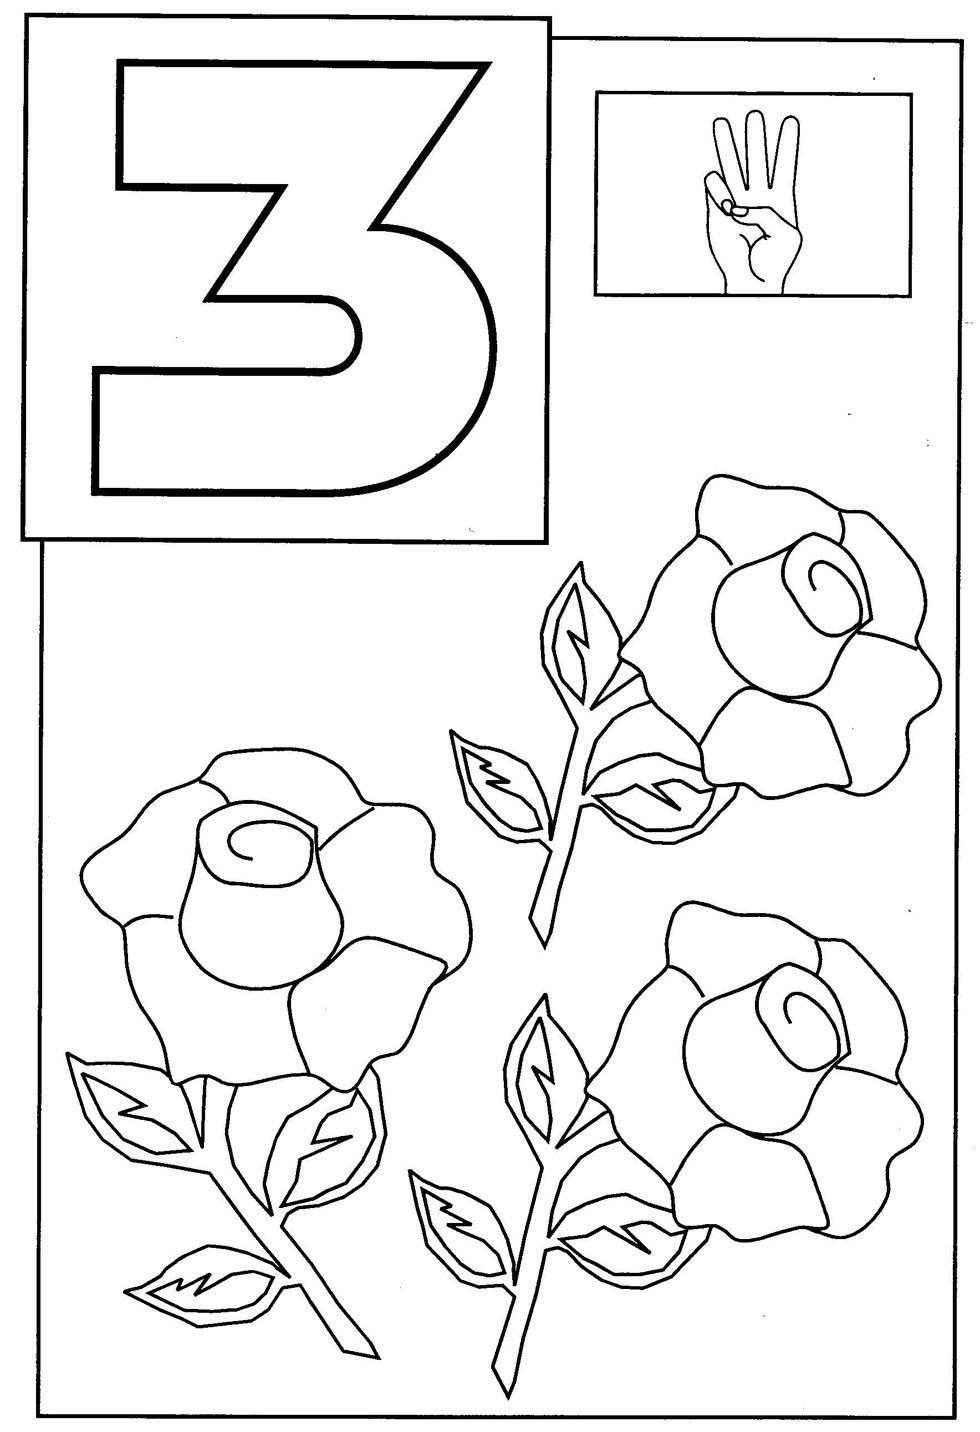 Download Number 3 Coloring Page - Coloring Home